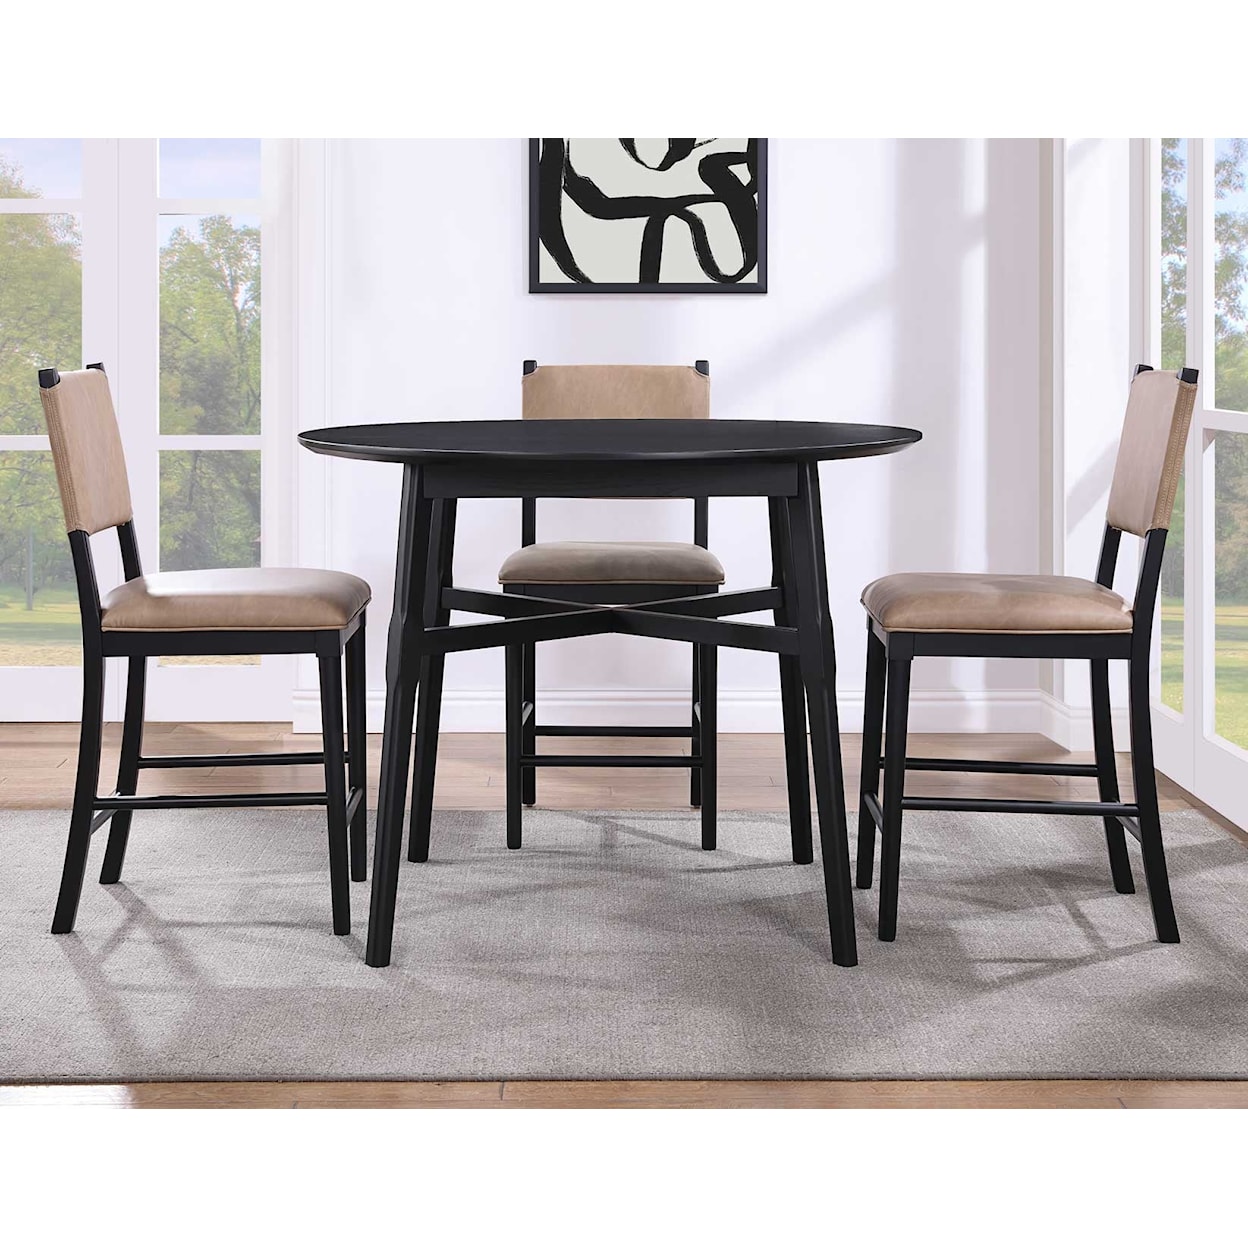 Steve Silver Oslo 4-Piece Counter Height Dining Set